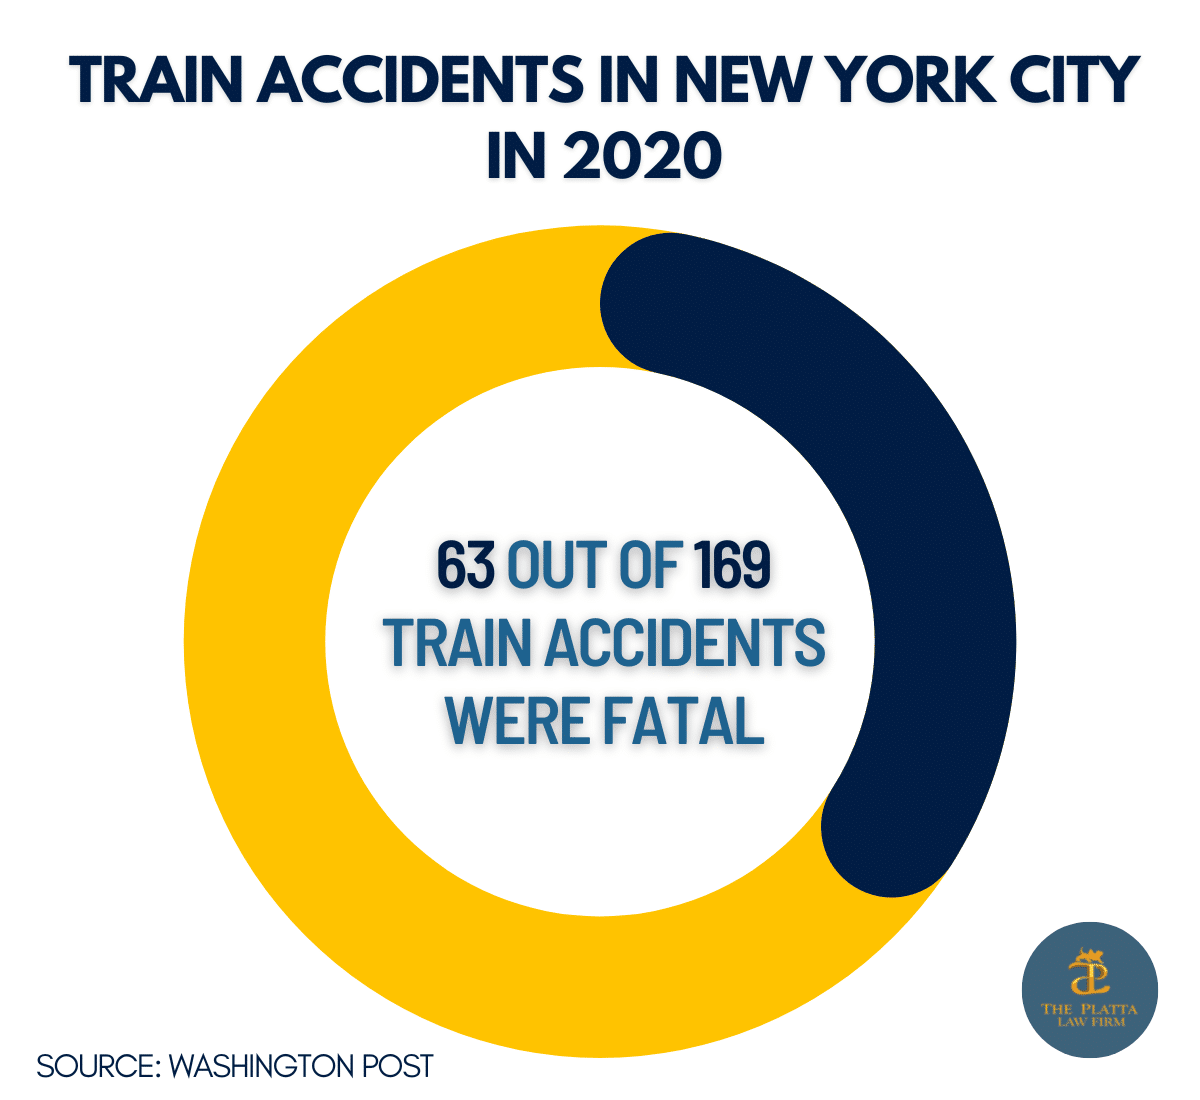 How common are train accidents